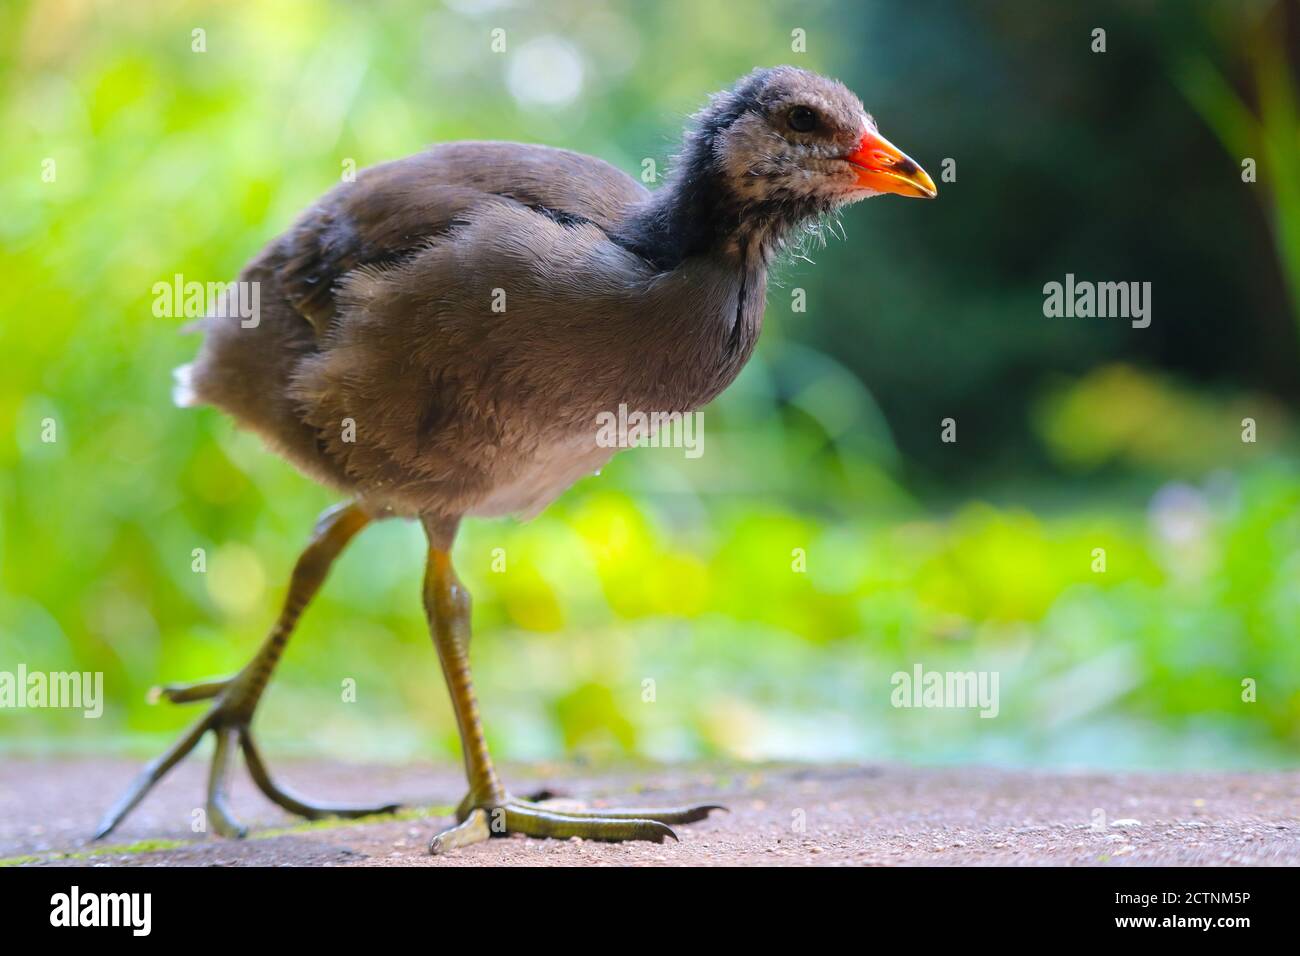 Young common moorhen, gallinula chloropus in side view walking on large feet in front of blurry green leaves in the sun Stock Photo